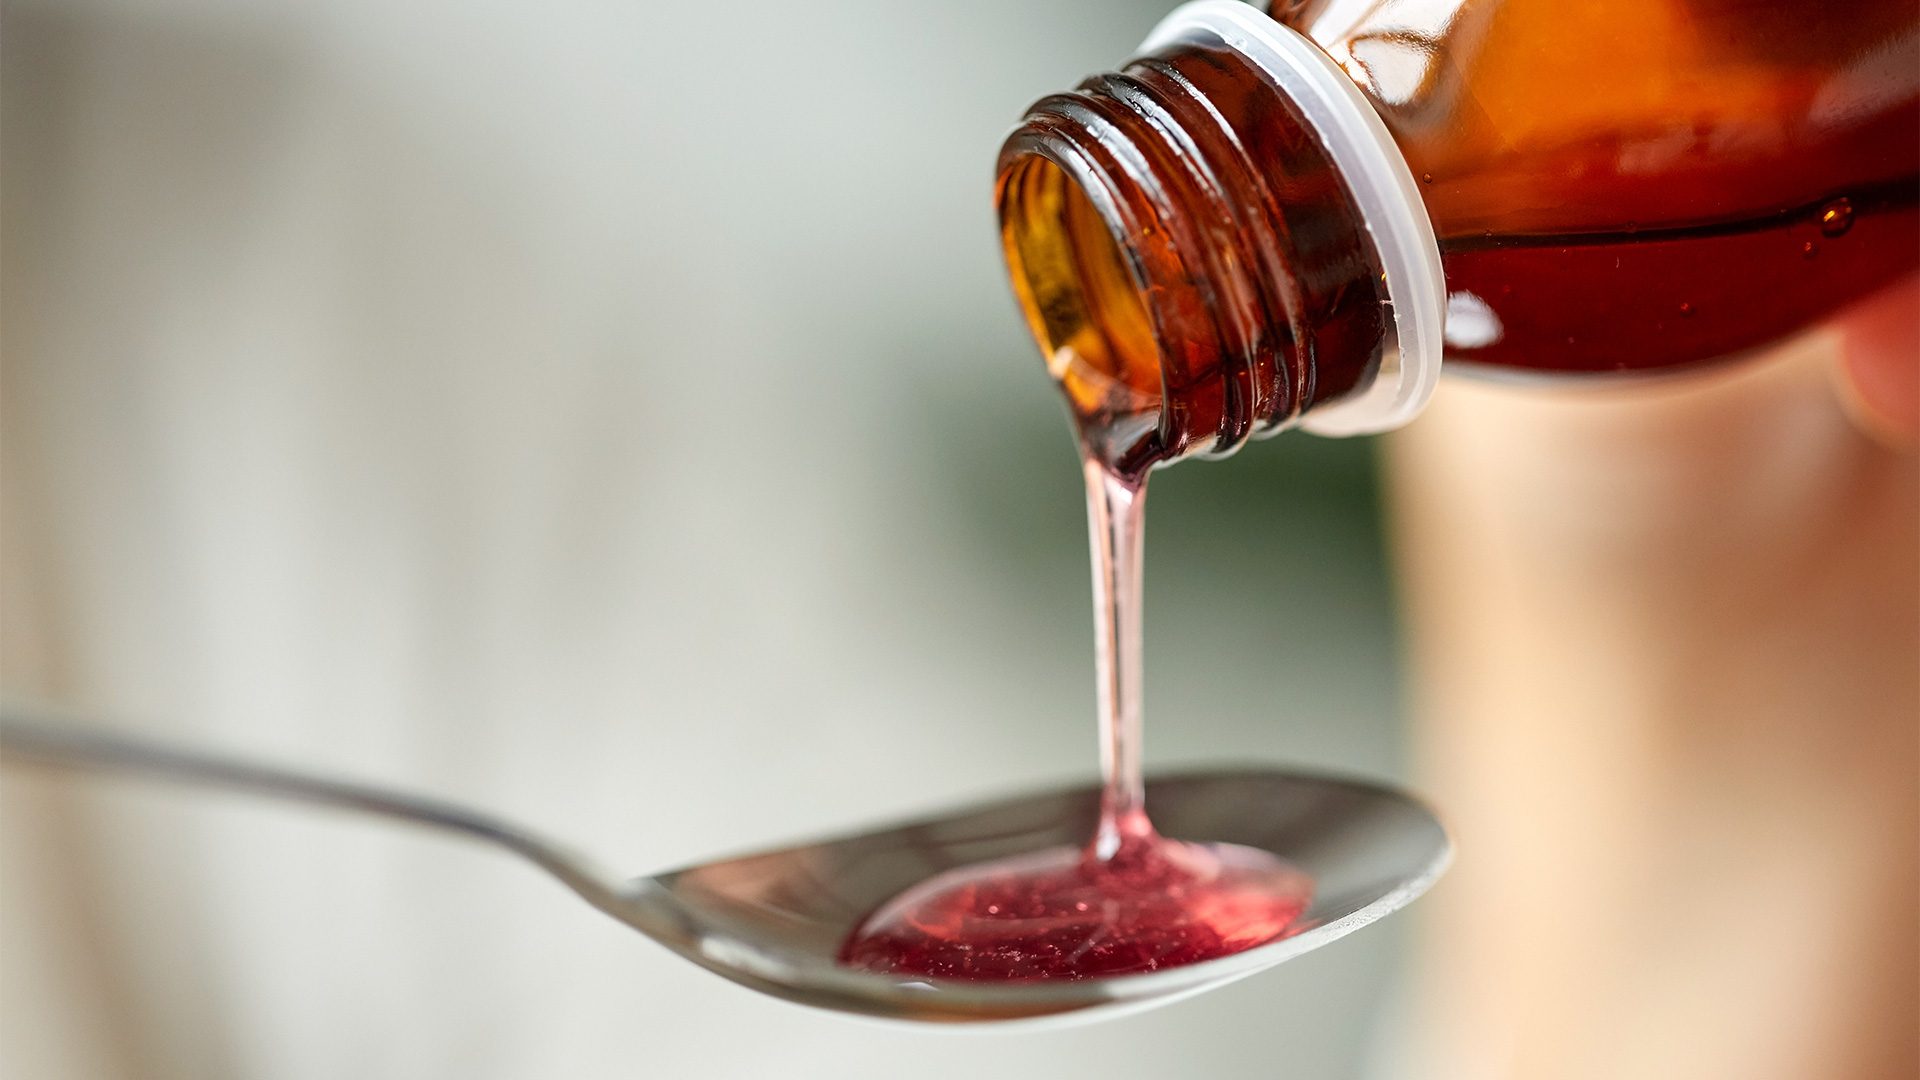 Indonesian court papers reveal chain of events that led to cough syrup deaths